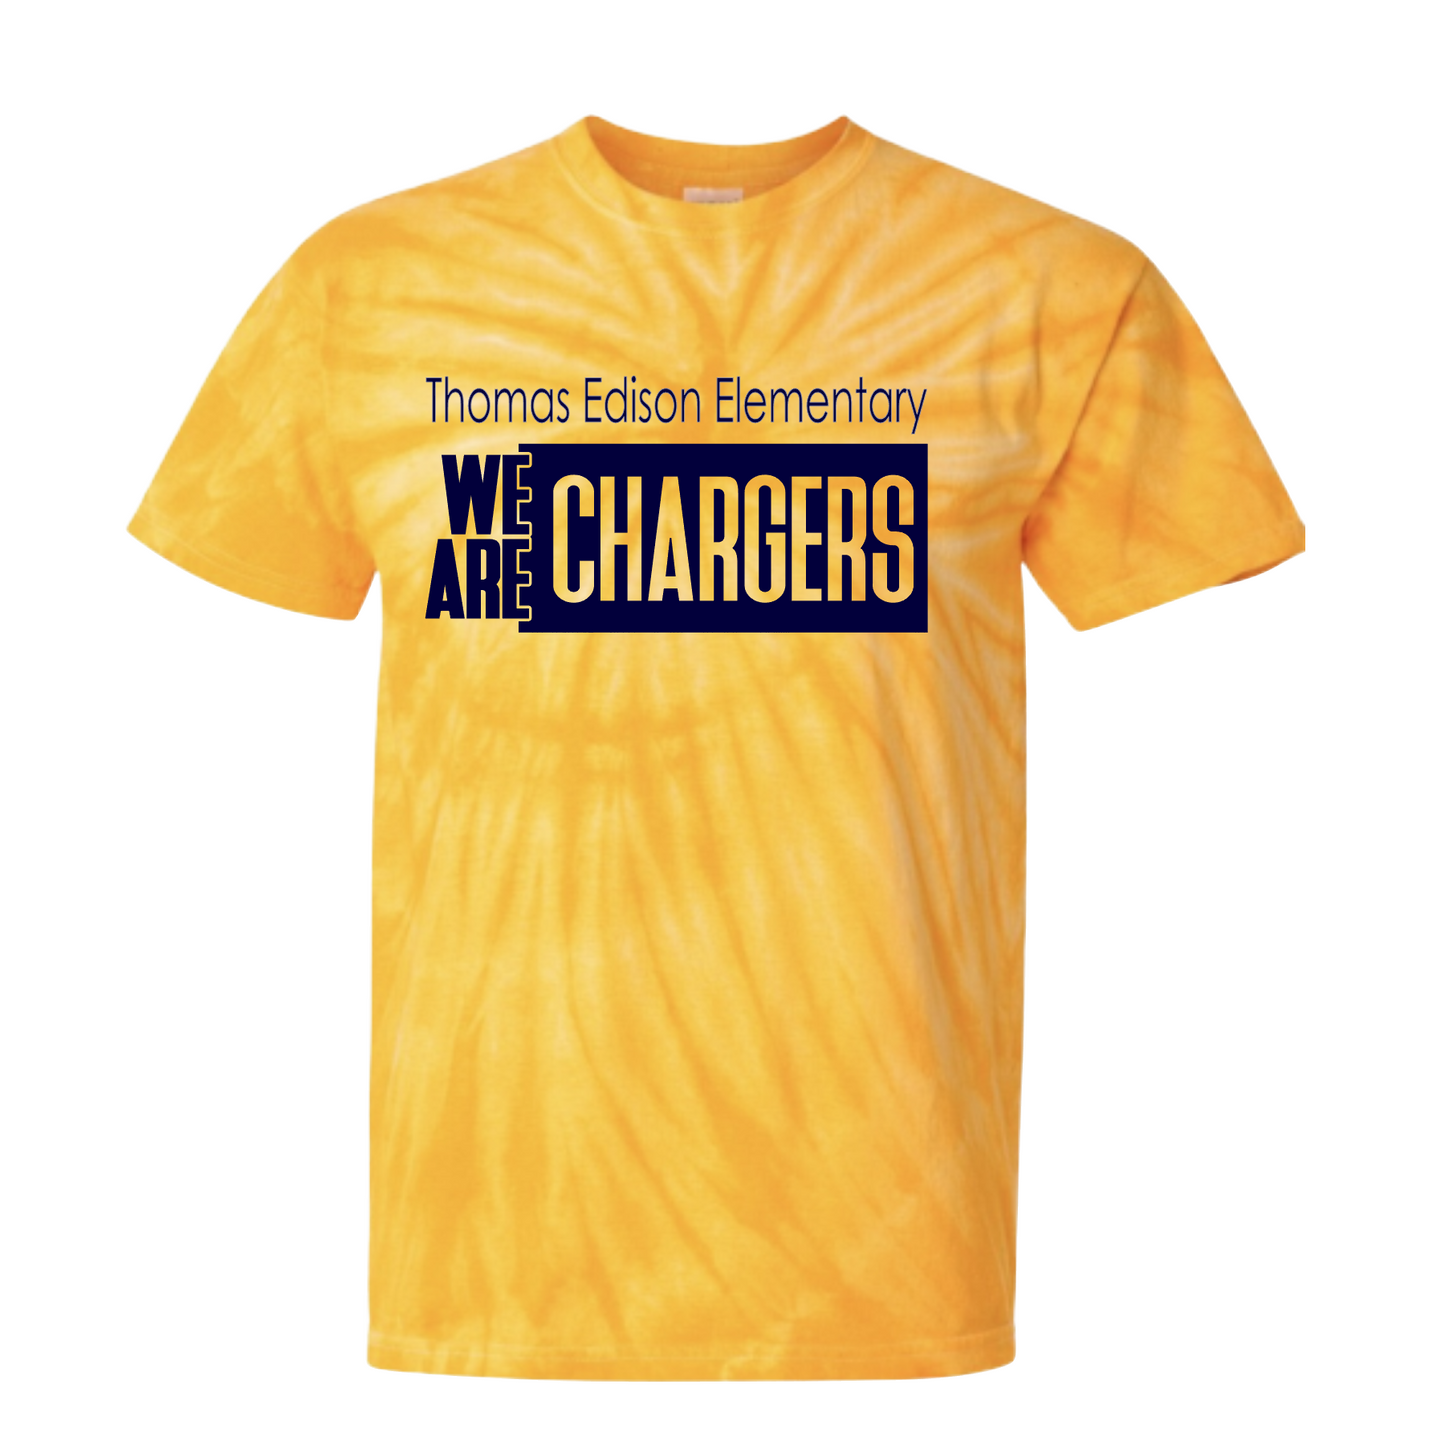 **LIMITED EDITION** We Are Chargers Tie Dye Tshirt